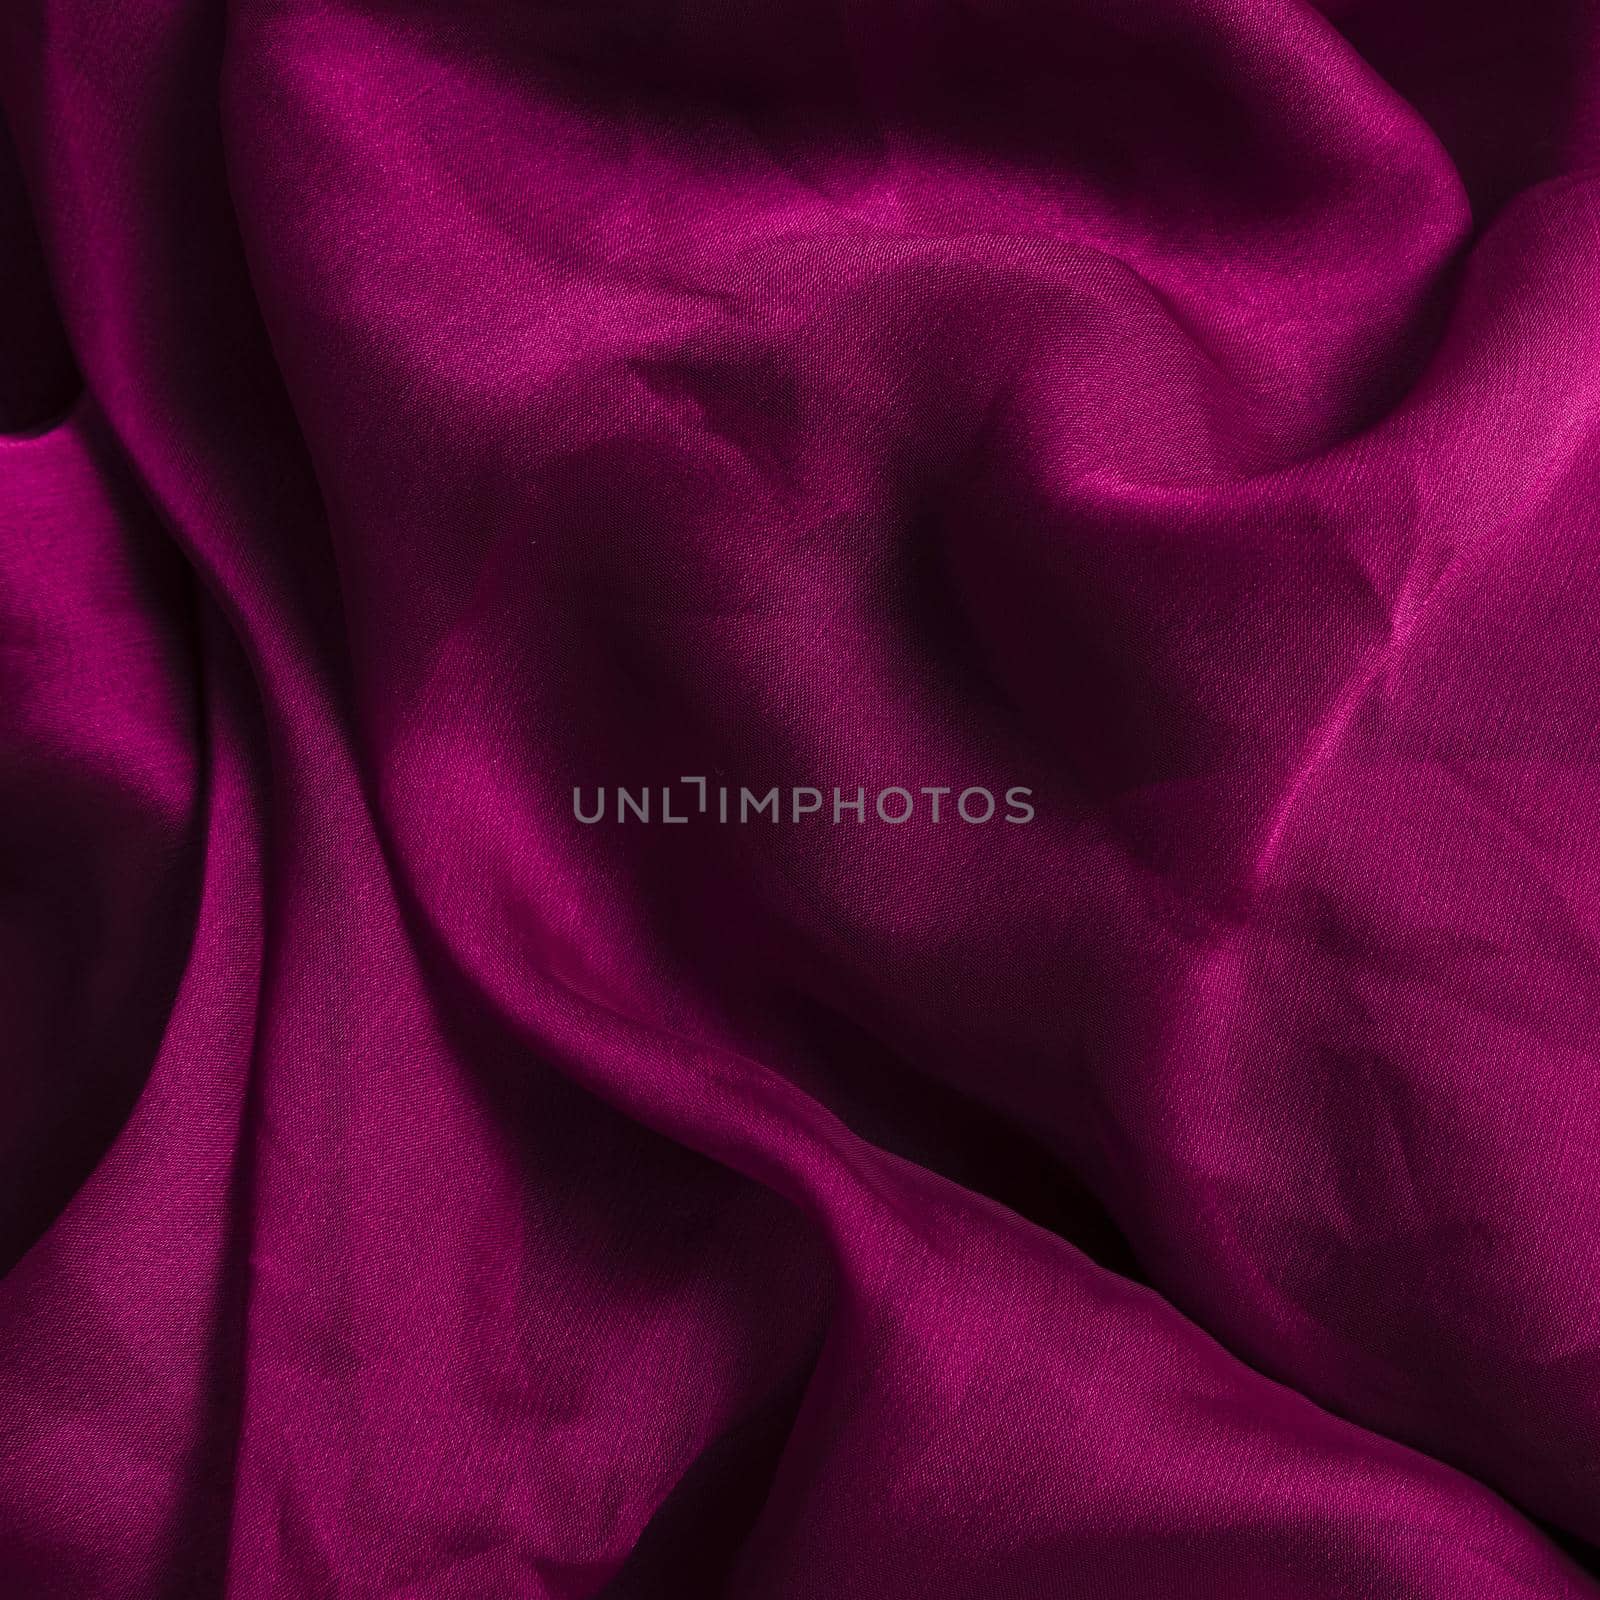 purple ornament indoors decor fabric material. High quality beautiful photo concept by Zahard